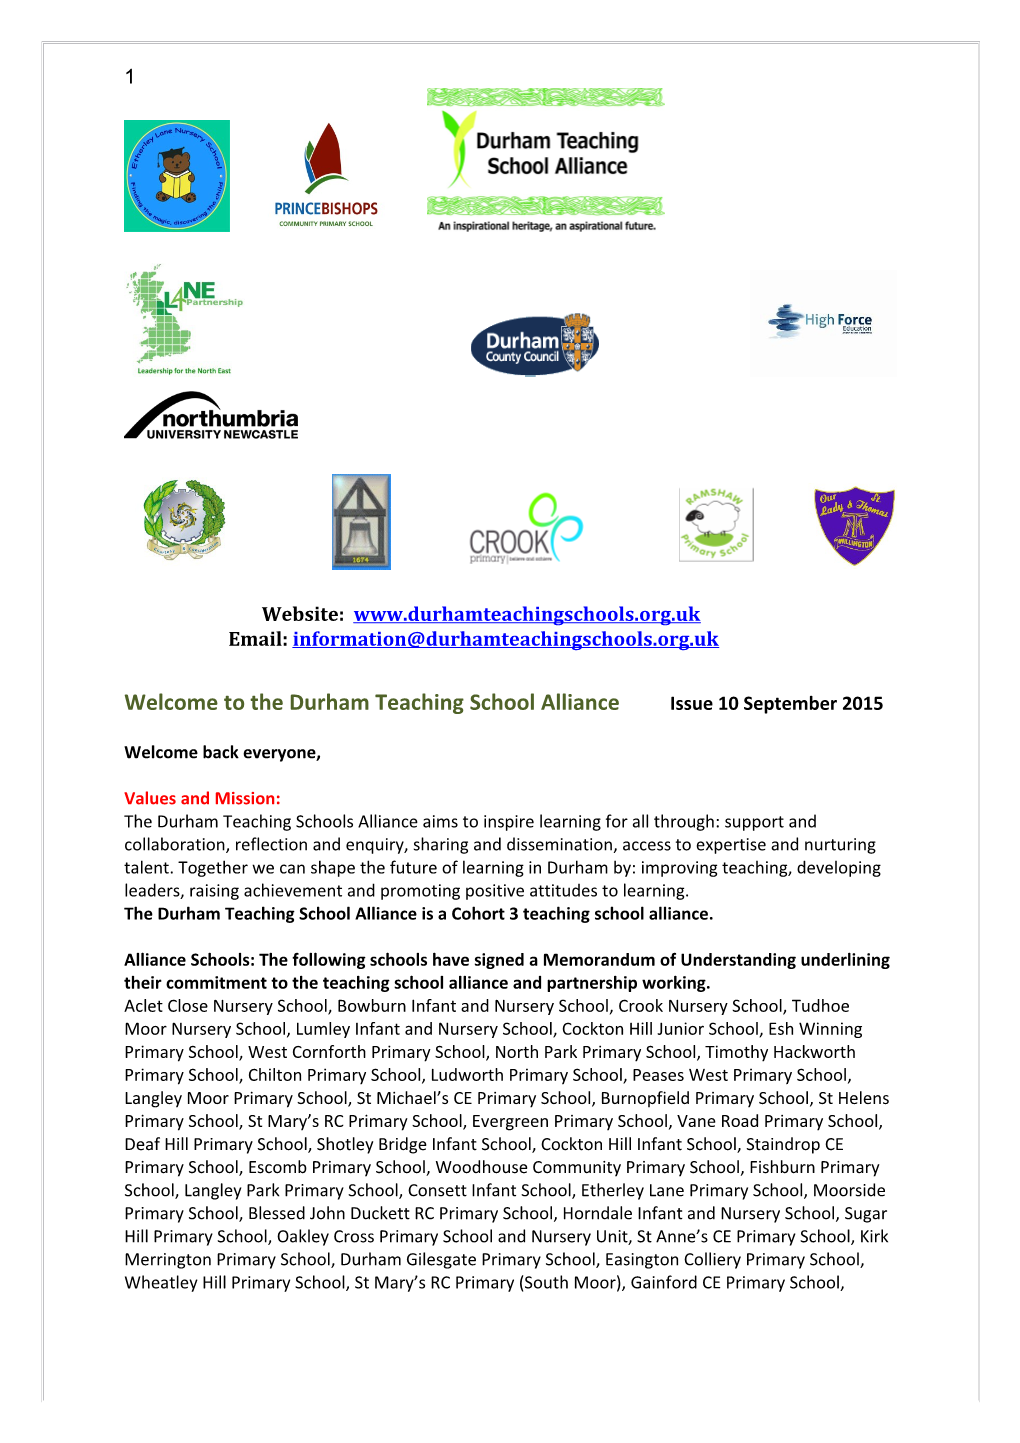 Welcome to the Durham Teaching School Alliance Issue 10 September 2015